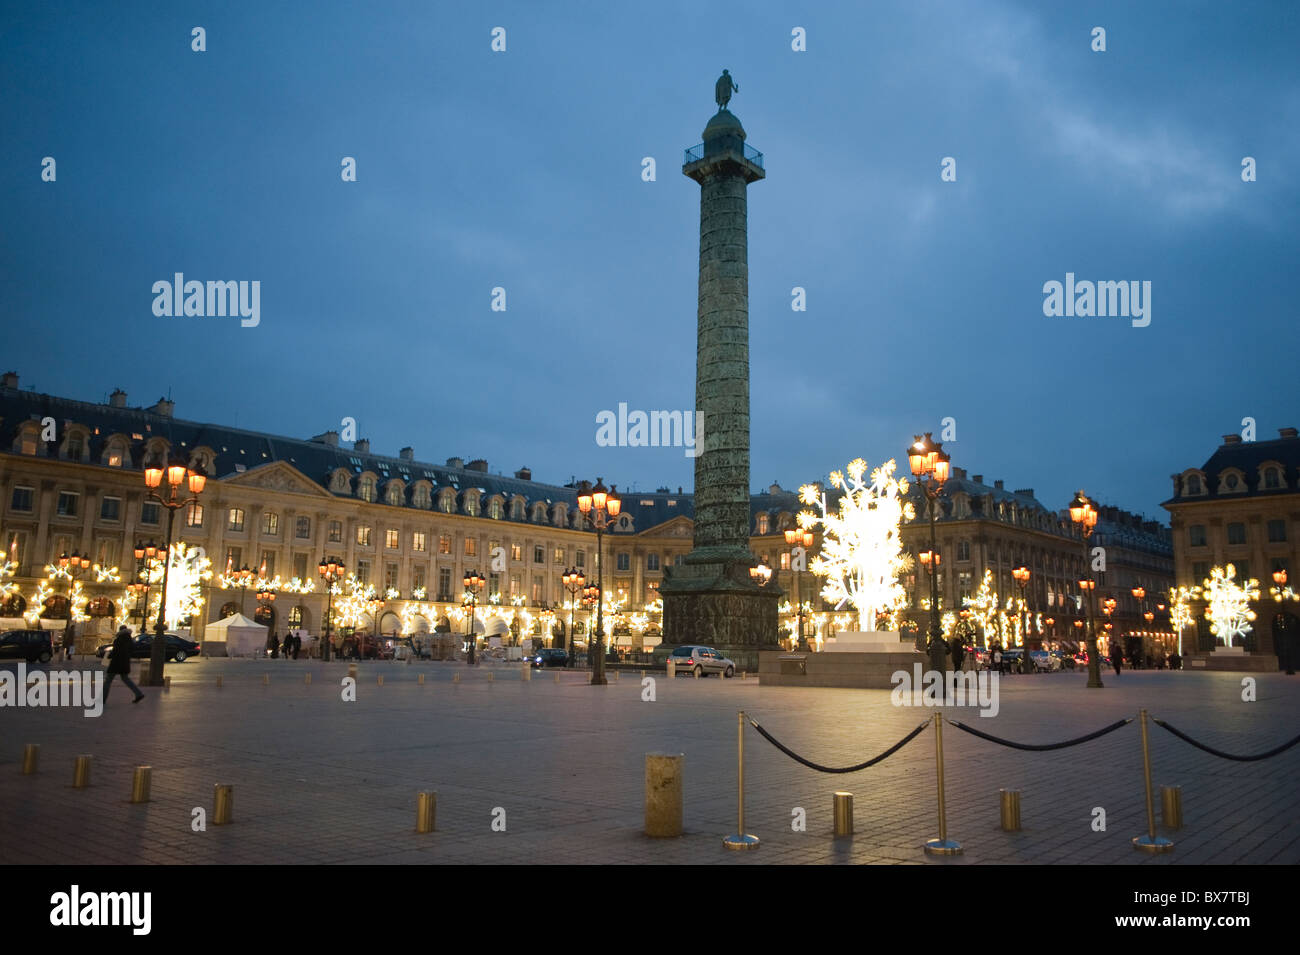 Paris, France, Street Scene, Wide Angle View, Luxury Christmas Shopping, Lighting Decorations, on "Place Vendome" with Column, Colonne Vendôme Stock Photo